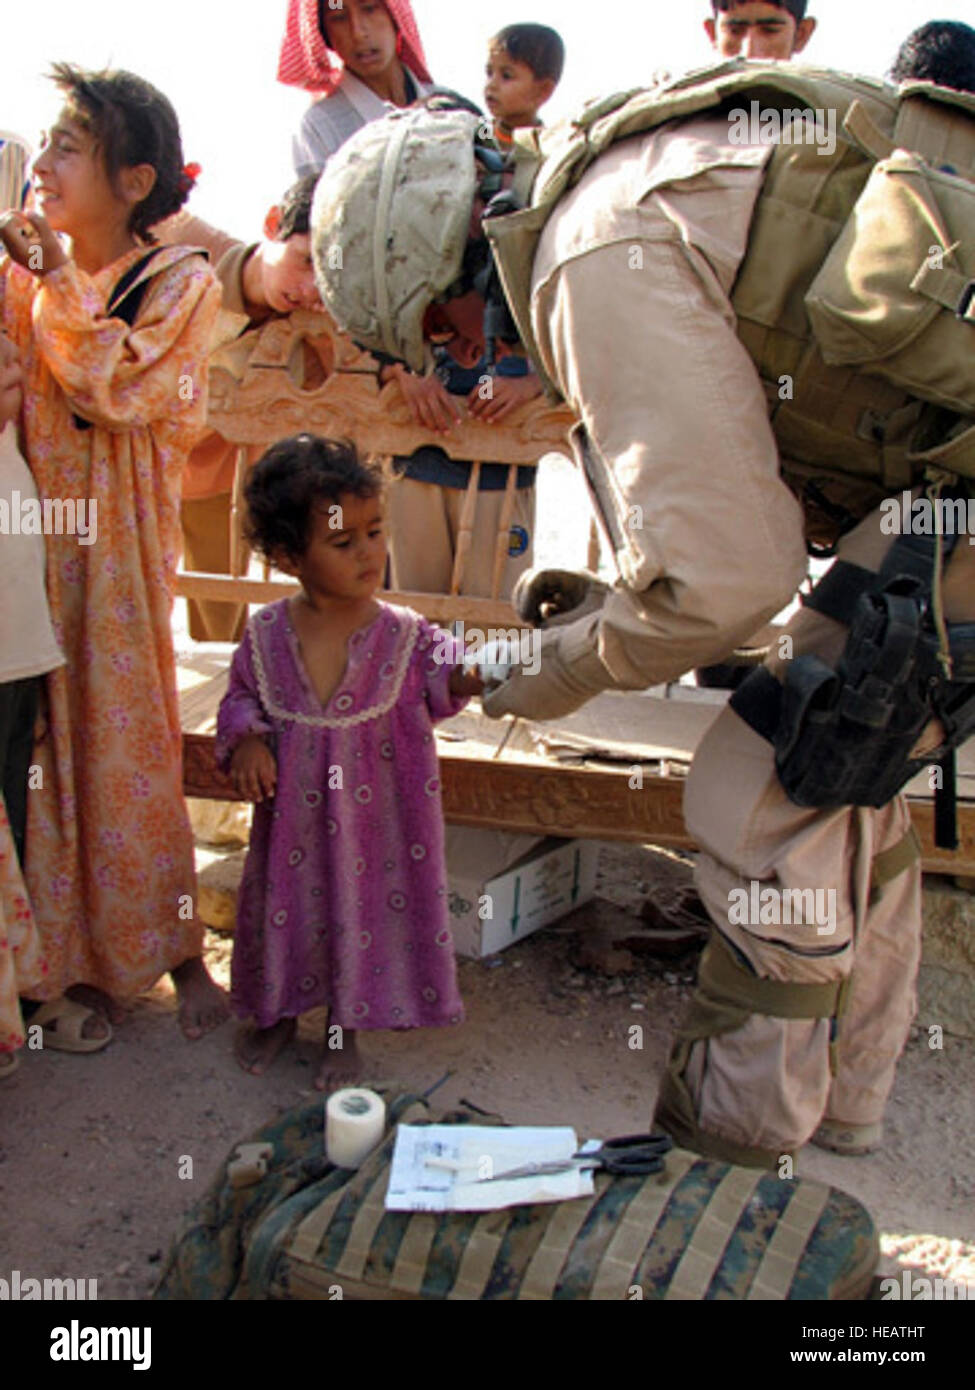 FALLUJAH, Iraq (Aug. 29, 2007) - U.S. Navy Hospital Corpsman Andrew Piazza applies a dressing to the hand of an Iraqi child discovered with second degree burns during a humanitarian assistance mission on Aug. 29, 2007. Piazza is assigned to Camp Fallujah, Iraq, and participated in a Civil Affairs mission conducted by Special Operations Task Force-West and a U.S. Marines Expeditionary Force Headquarters Battalion to deliver school supplies and clothing items to local children. Nearly 200 backpacks and more than 500 clothing items were distributed to approximately 200 children during the mission Stock Photo